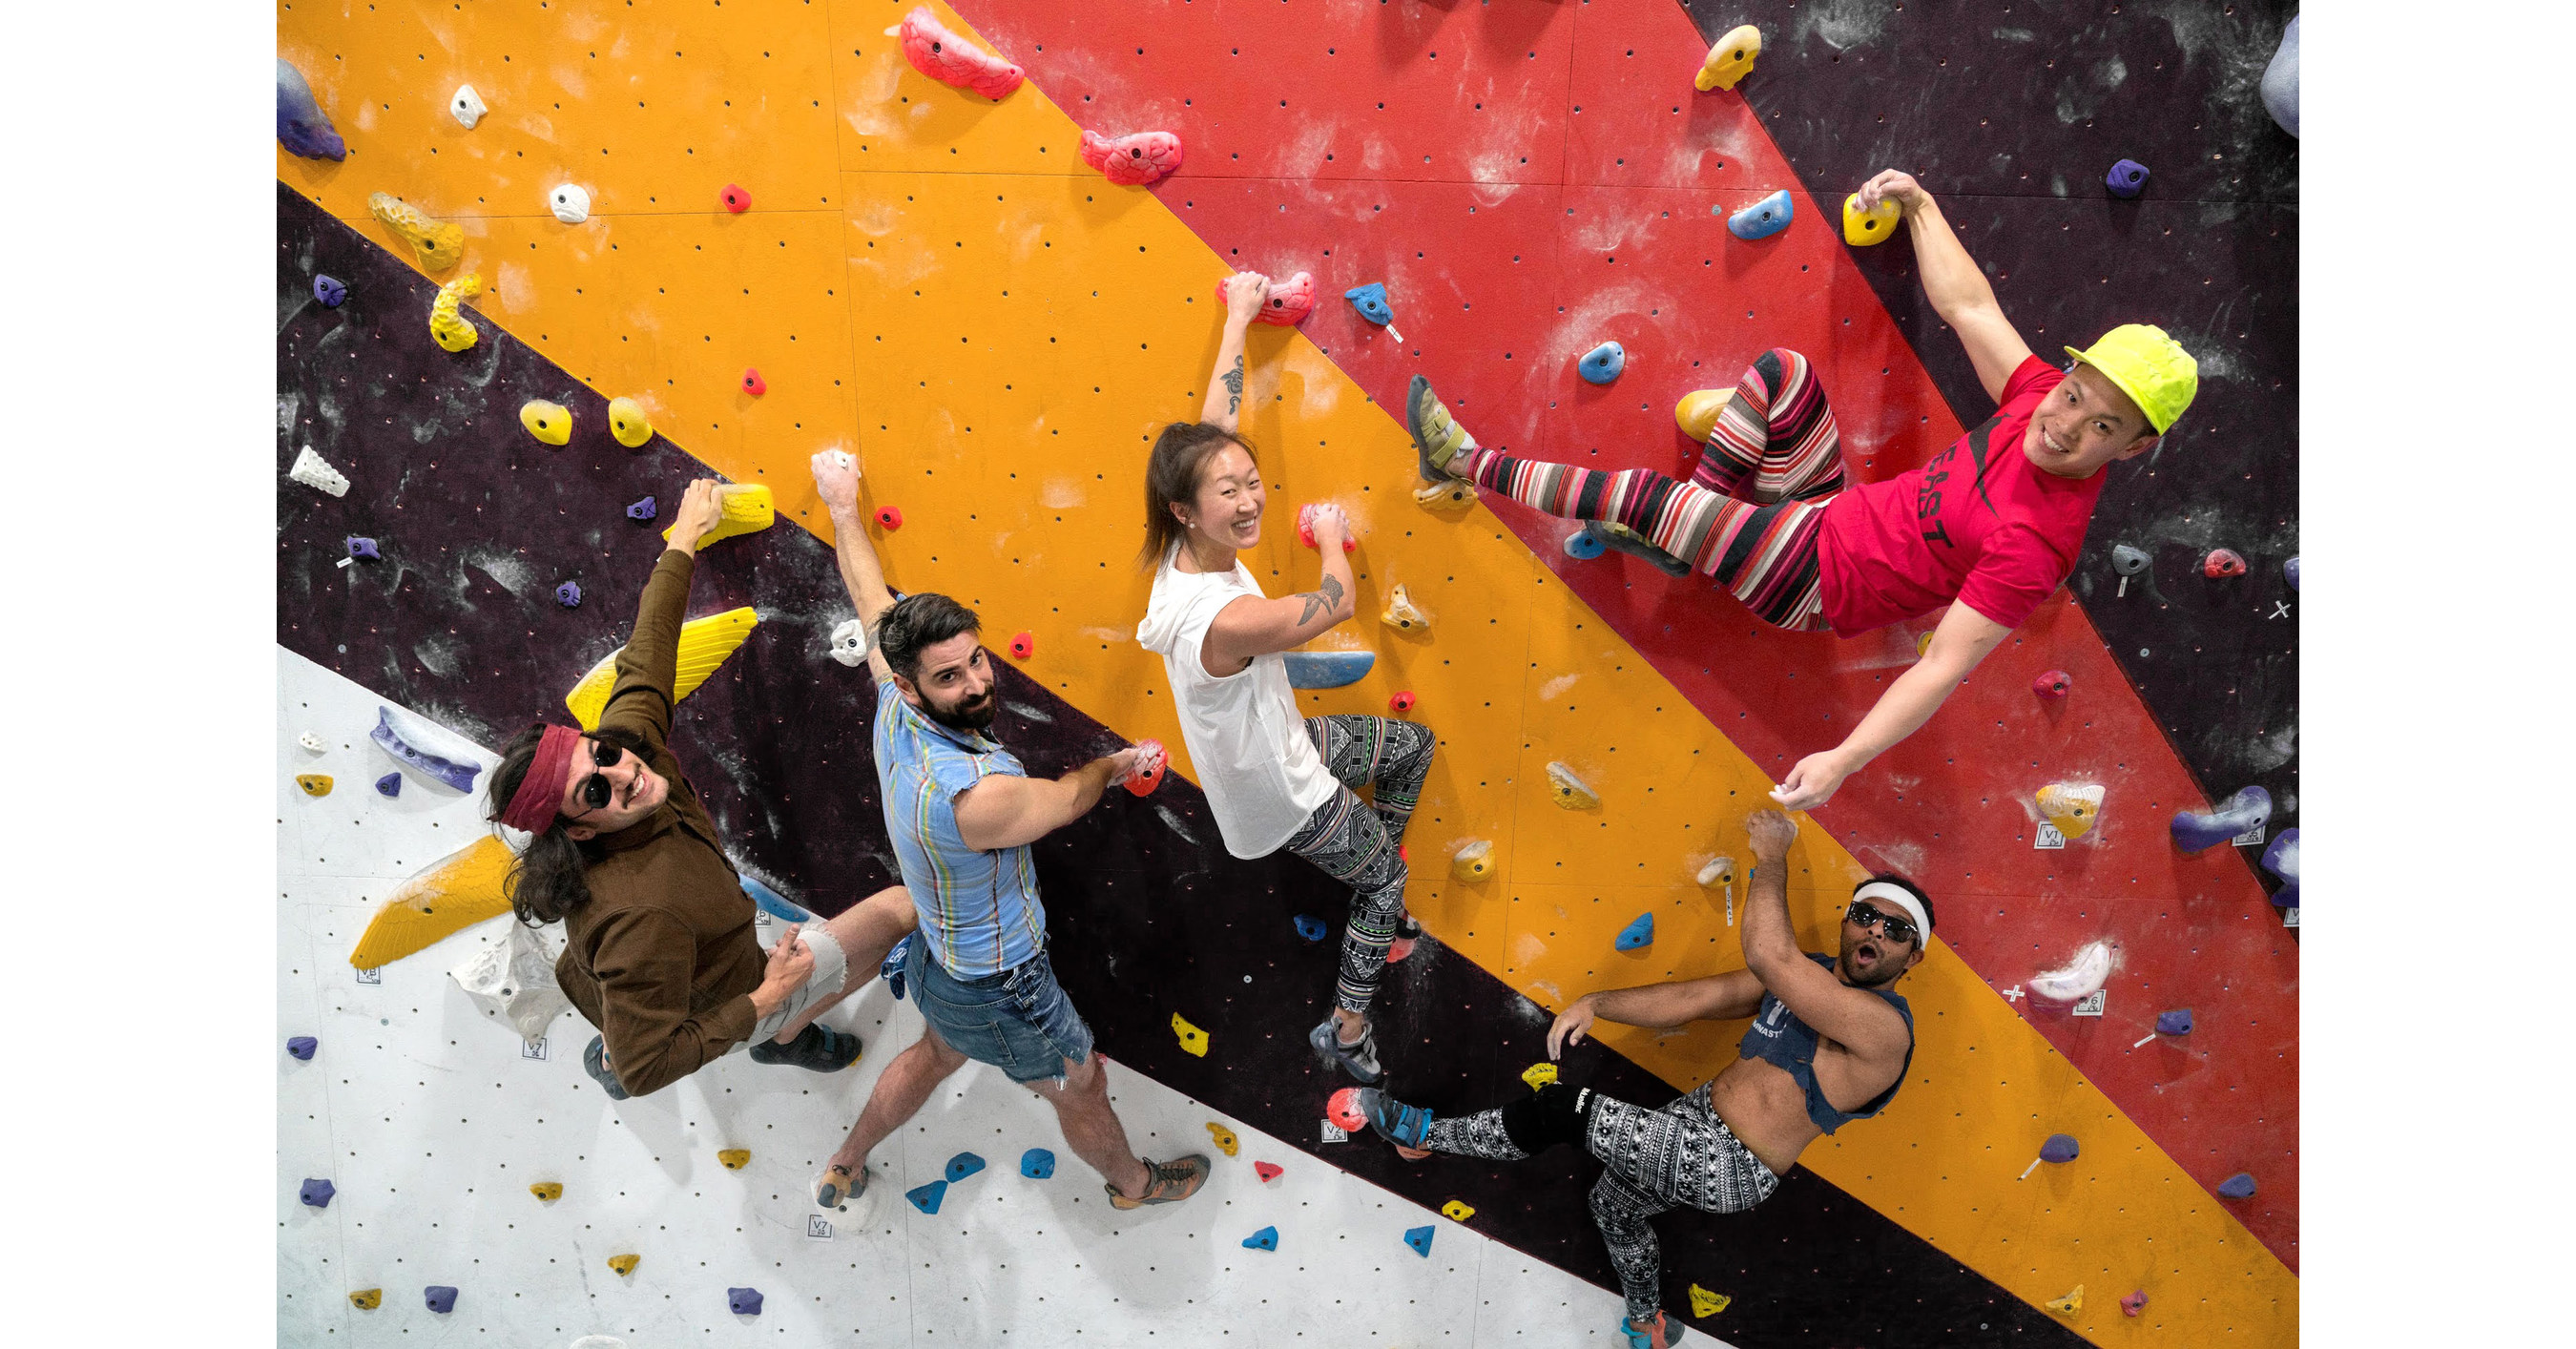 https://mma.prnewswire.com/media/1747216/First_Ascent_Climbing_Fitness_Station_Square.jpg?p=facebook